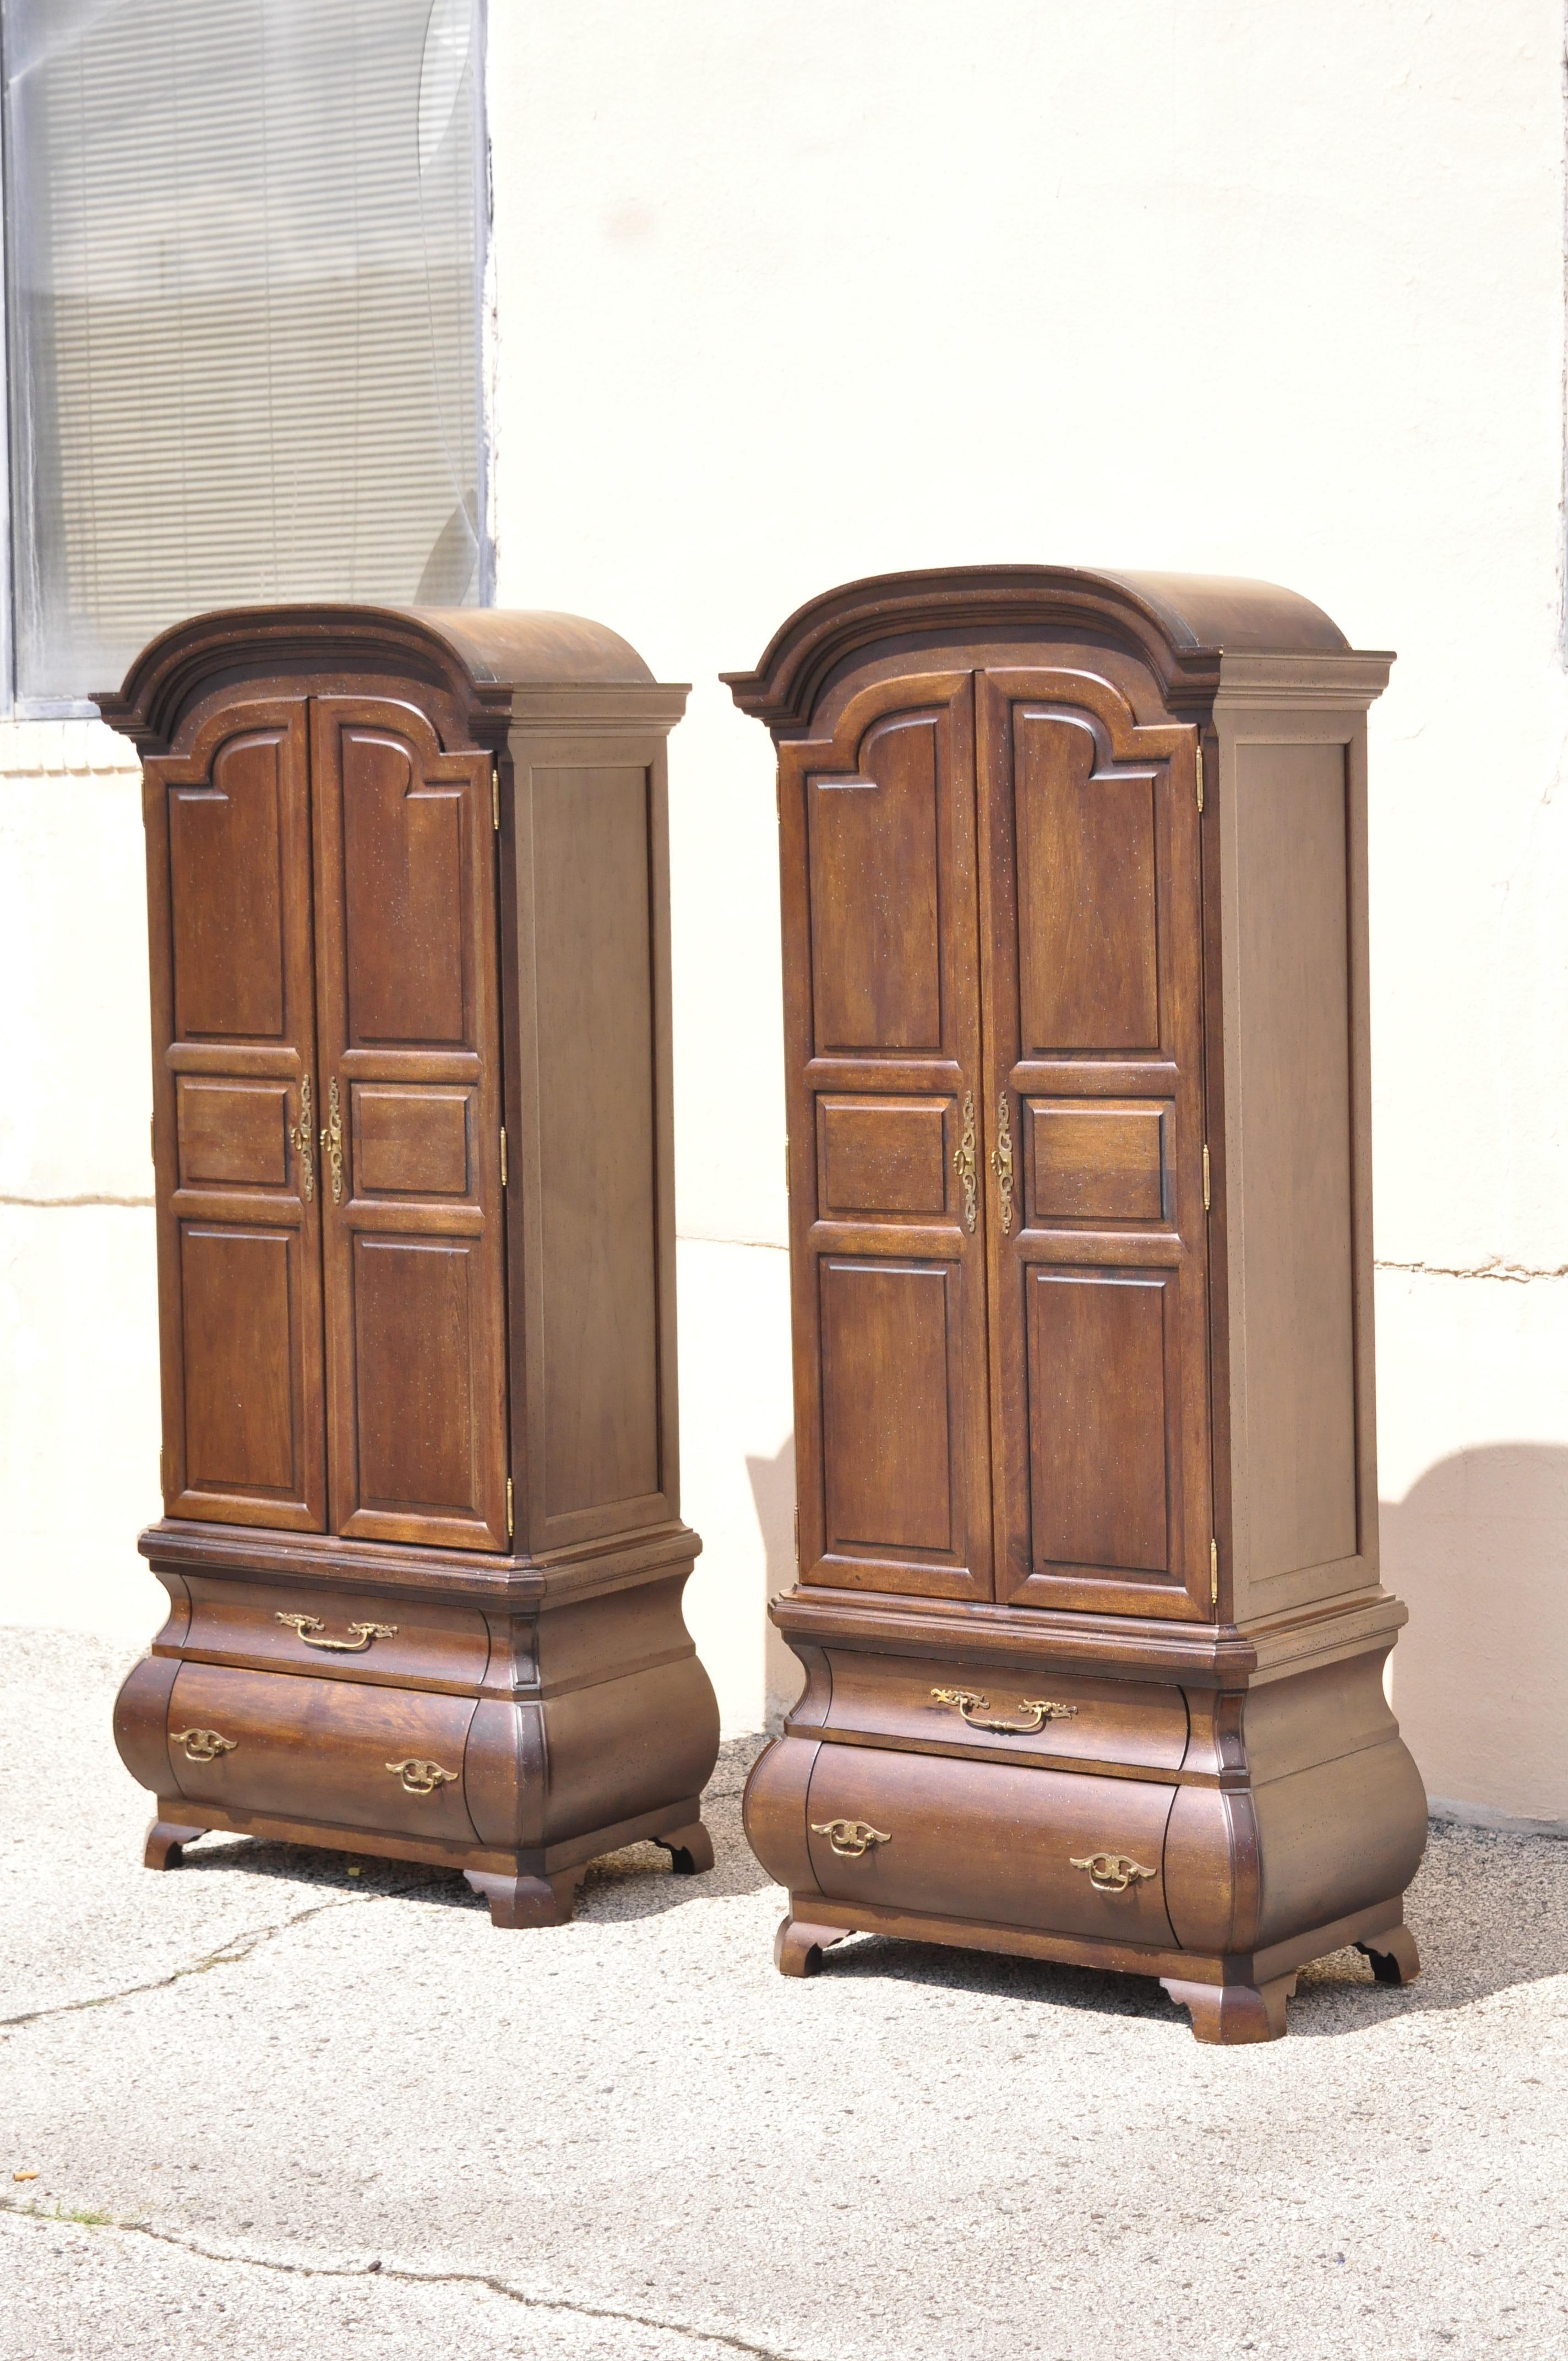 Warsaw Cabinetmaker French Provincial Bonnet Top Bombe Armoire Cabinets, a Pair For Sale 5